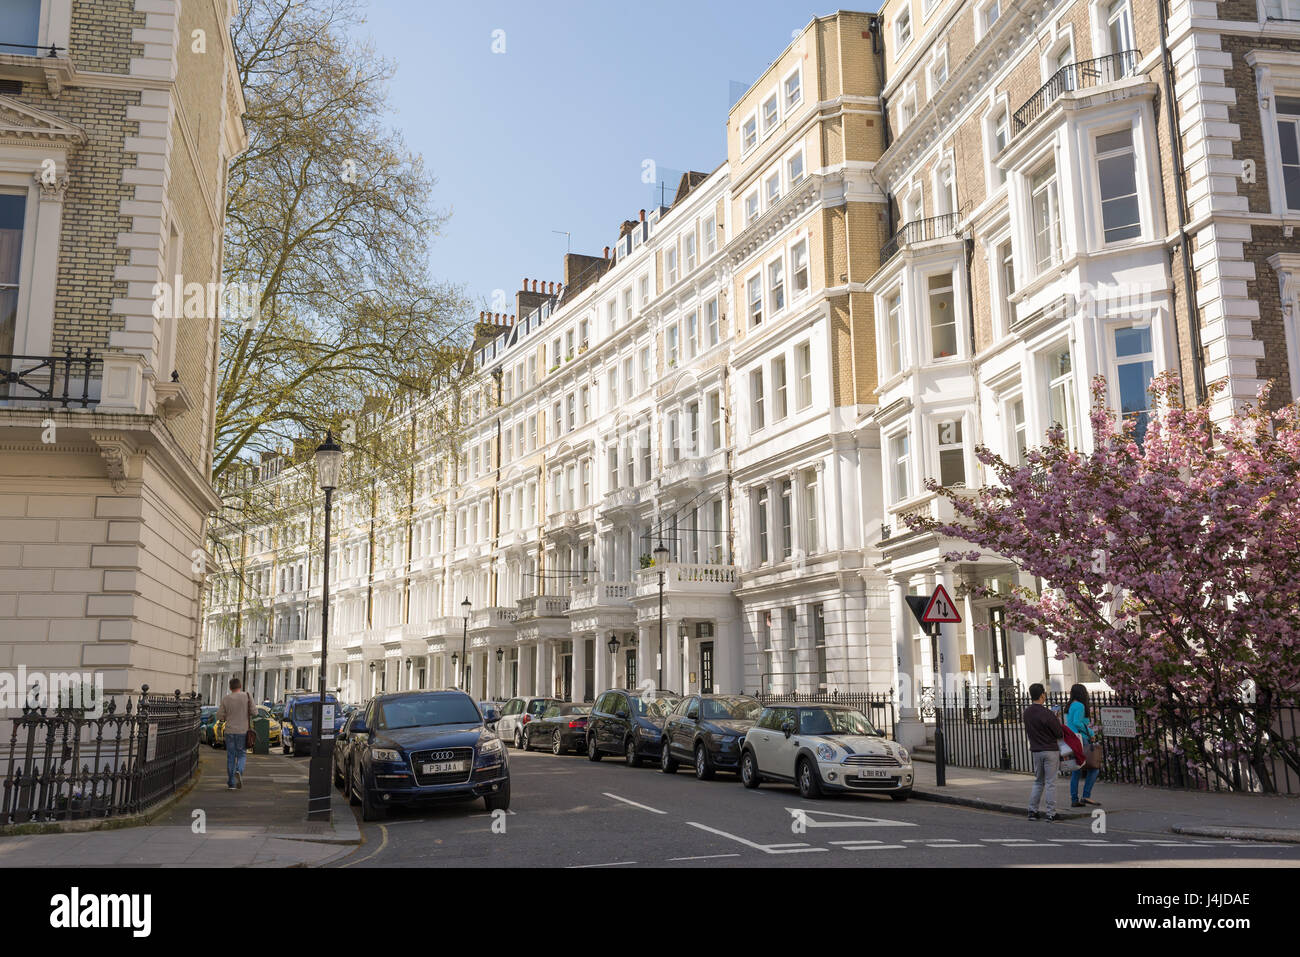 View of street with restored elegant Victorian Edwardian luxury houses in the exclusive area of South Kensington, London, UK Stock Photo